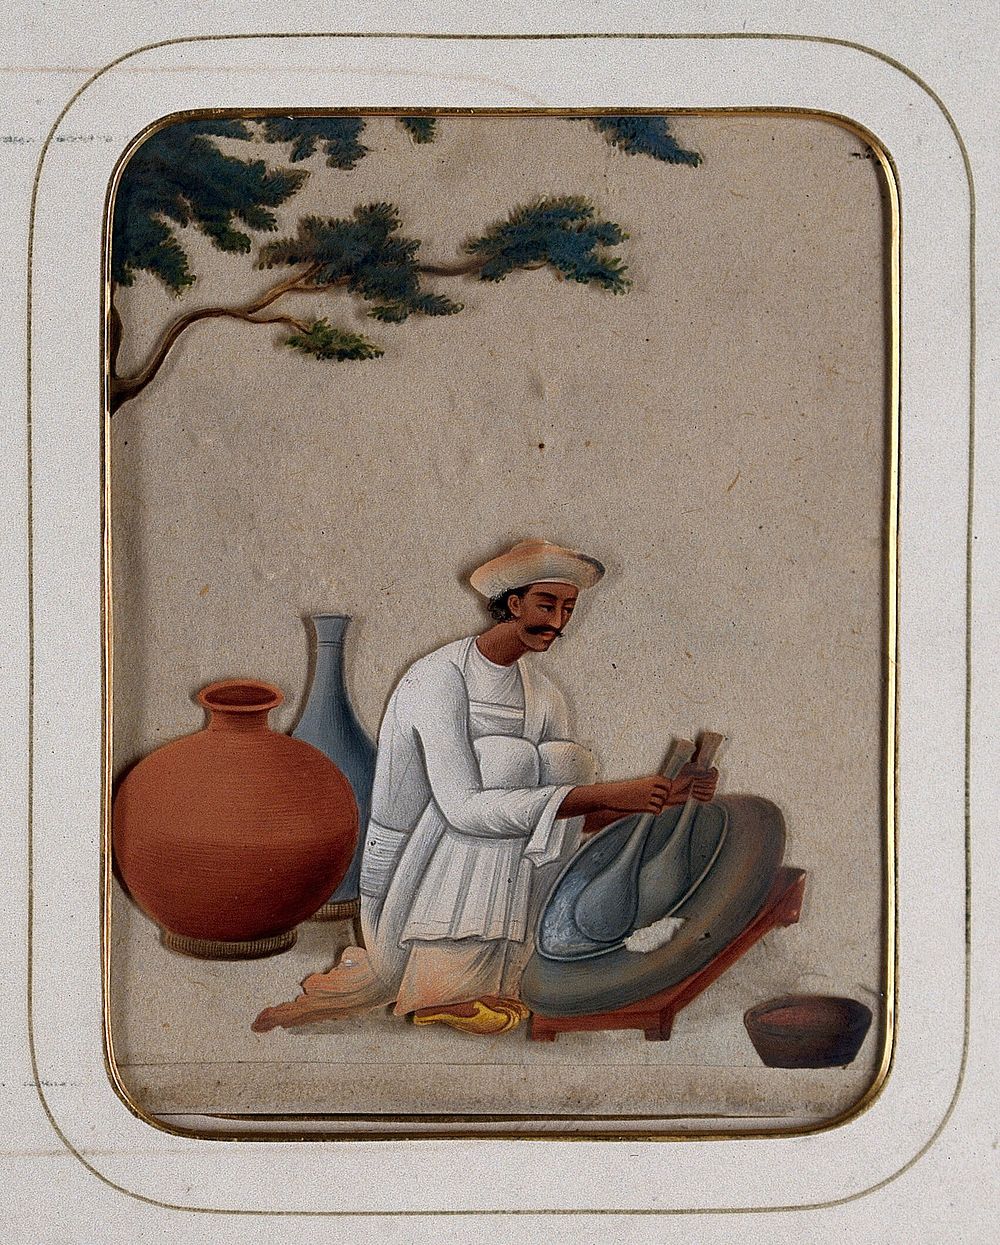 A man pounding  with pestle type equipment in both hands. Gouache painting on mica by an Indian artist.